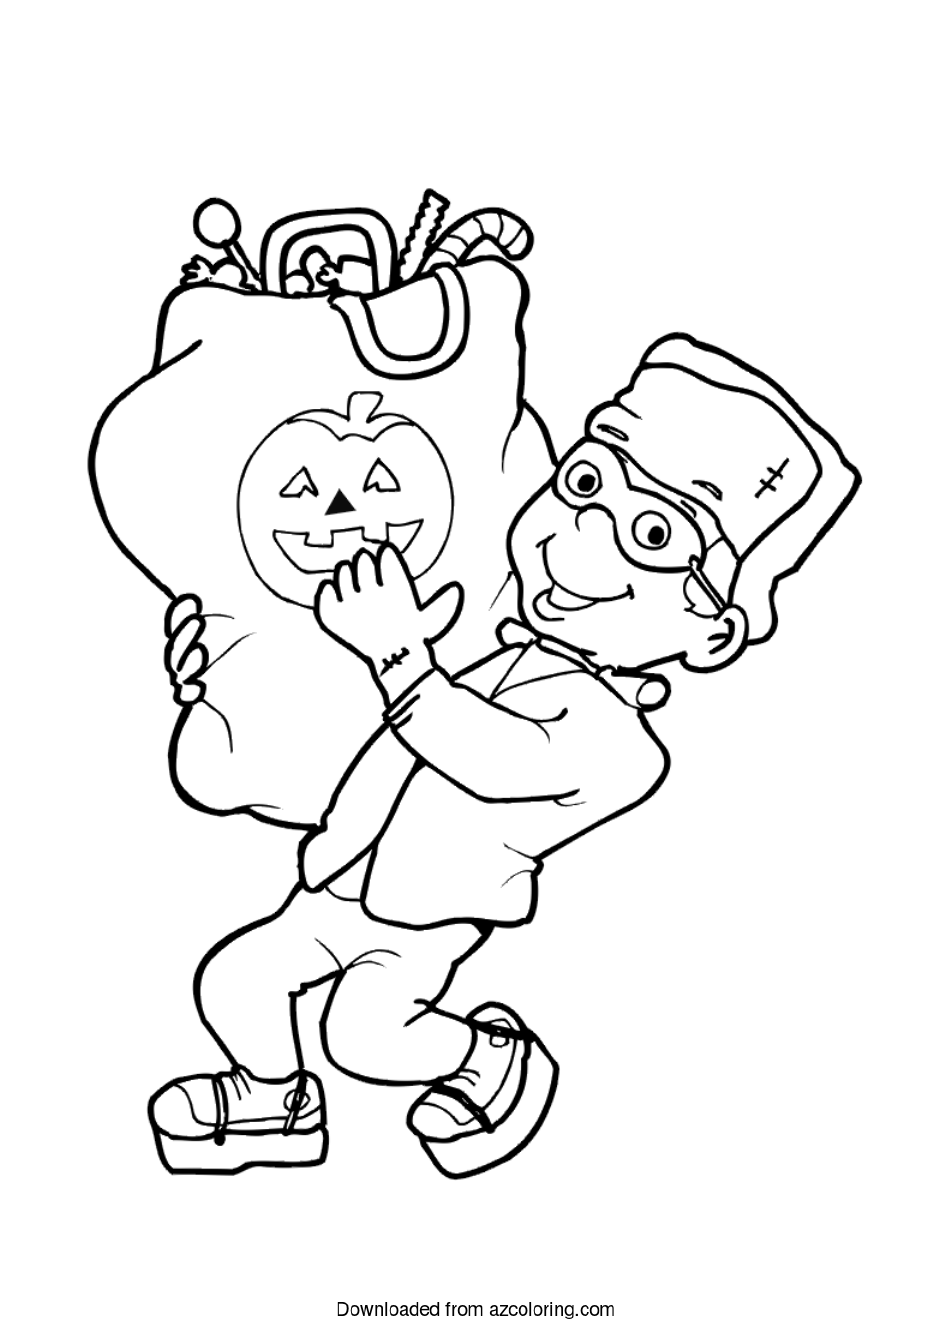 Halloween Coloring Page - Bag of Treats